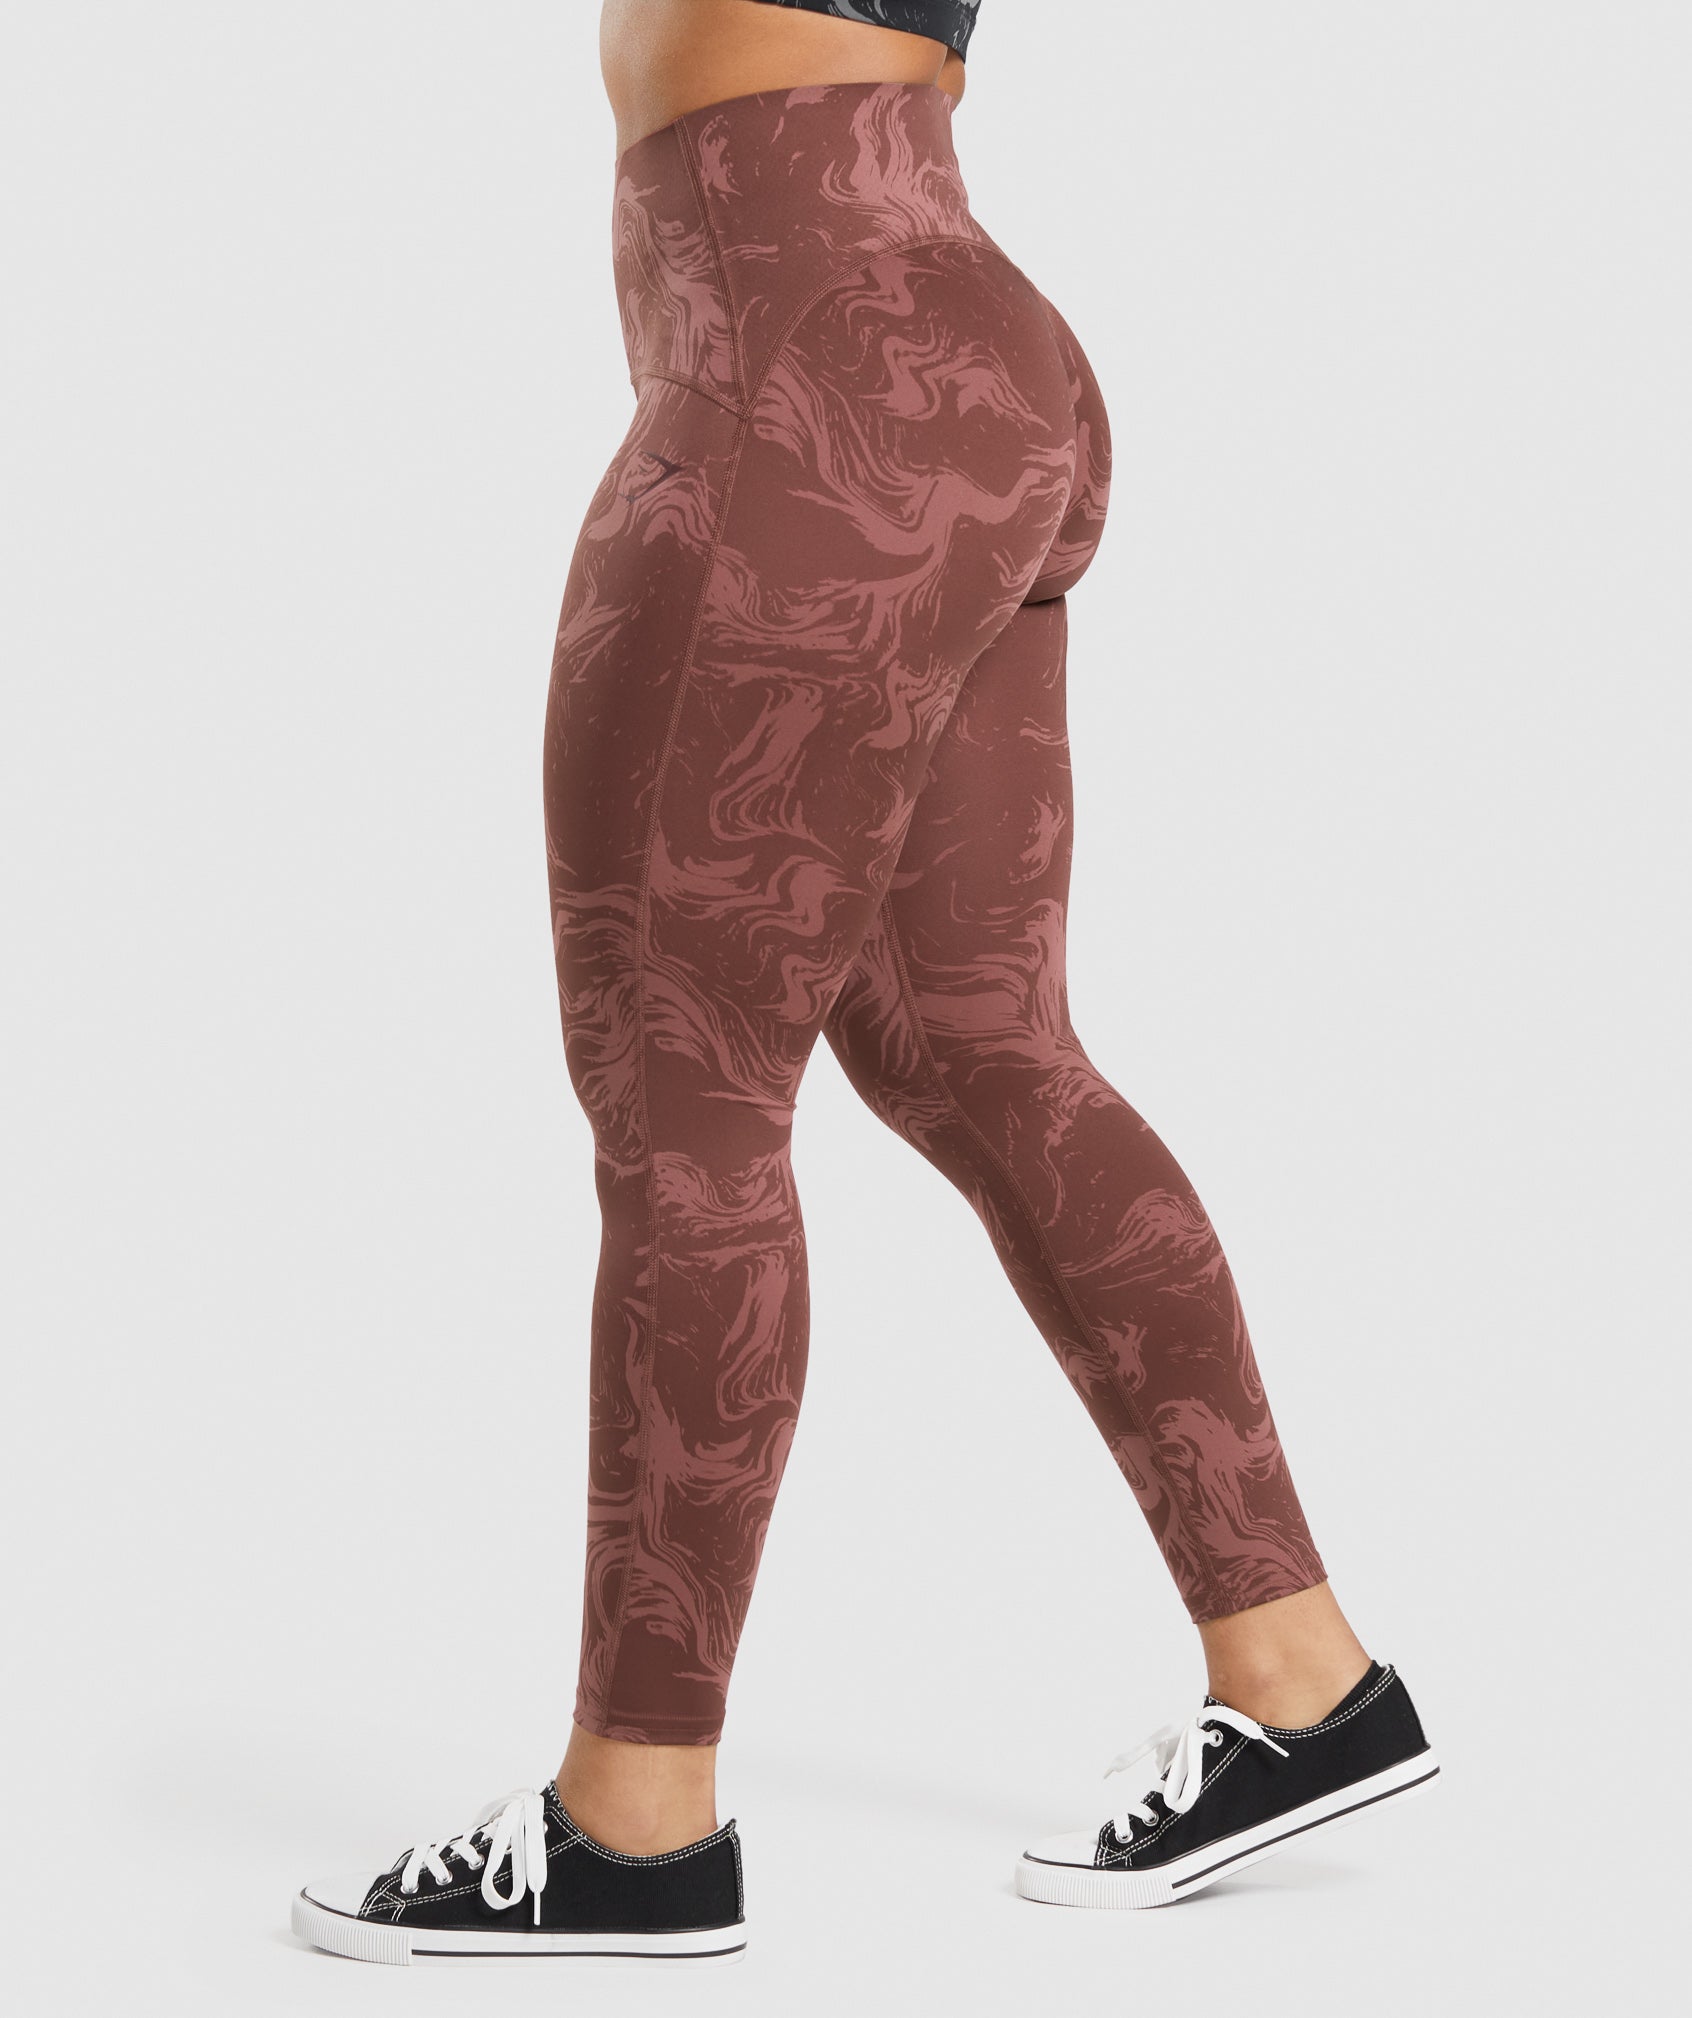 Waist Support Leggings in Cherry Brown Print - view 3